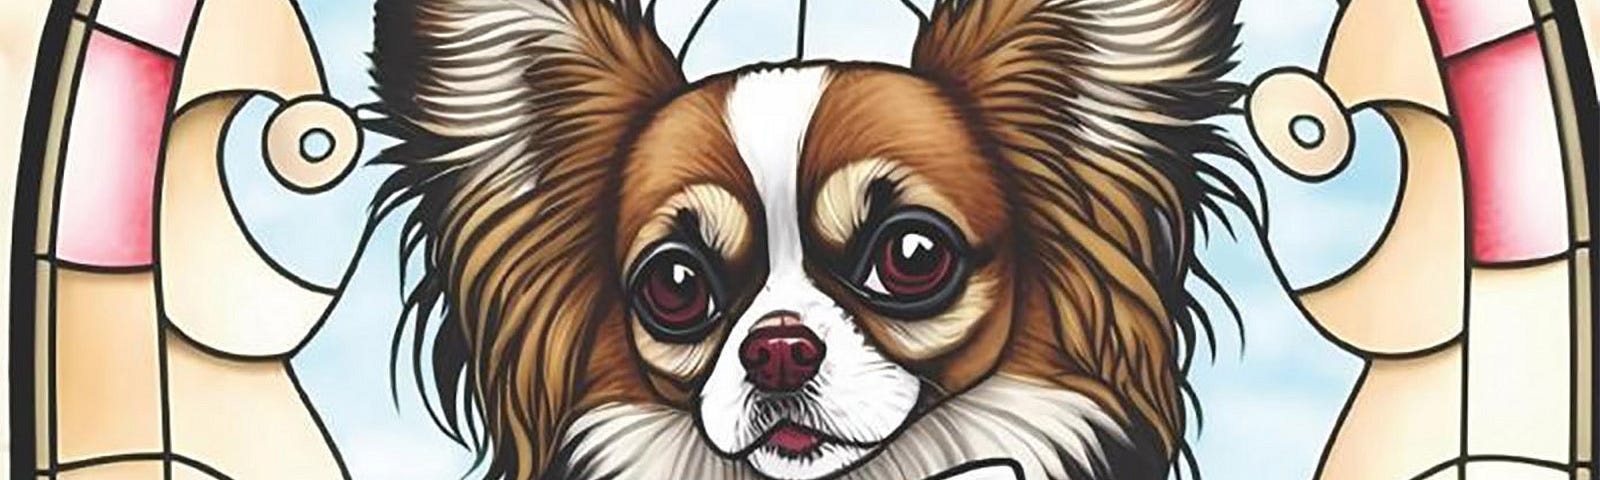 A colouring book cover showing a papillon butterfly dog sitting with some roses within a stained glass window